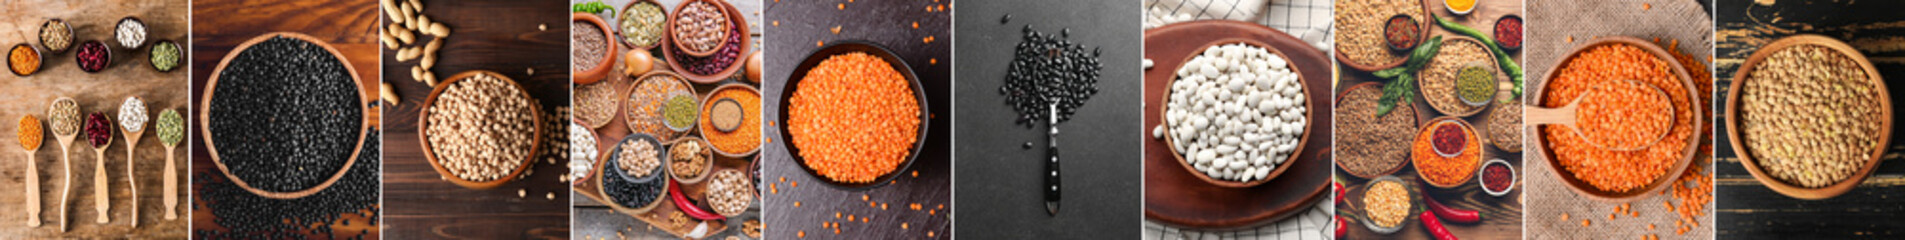 Collage of raw legumes on table, top view